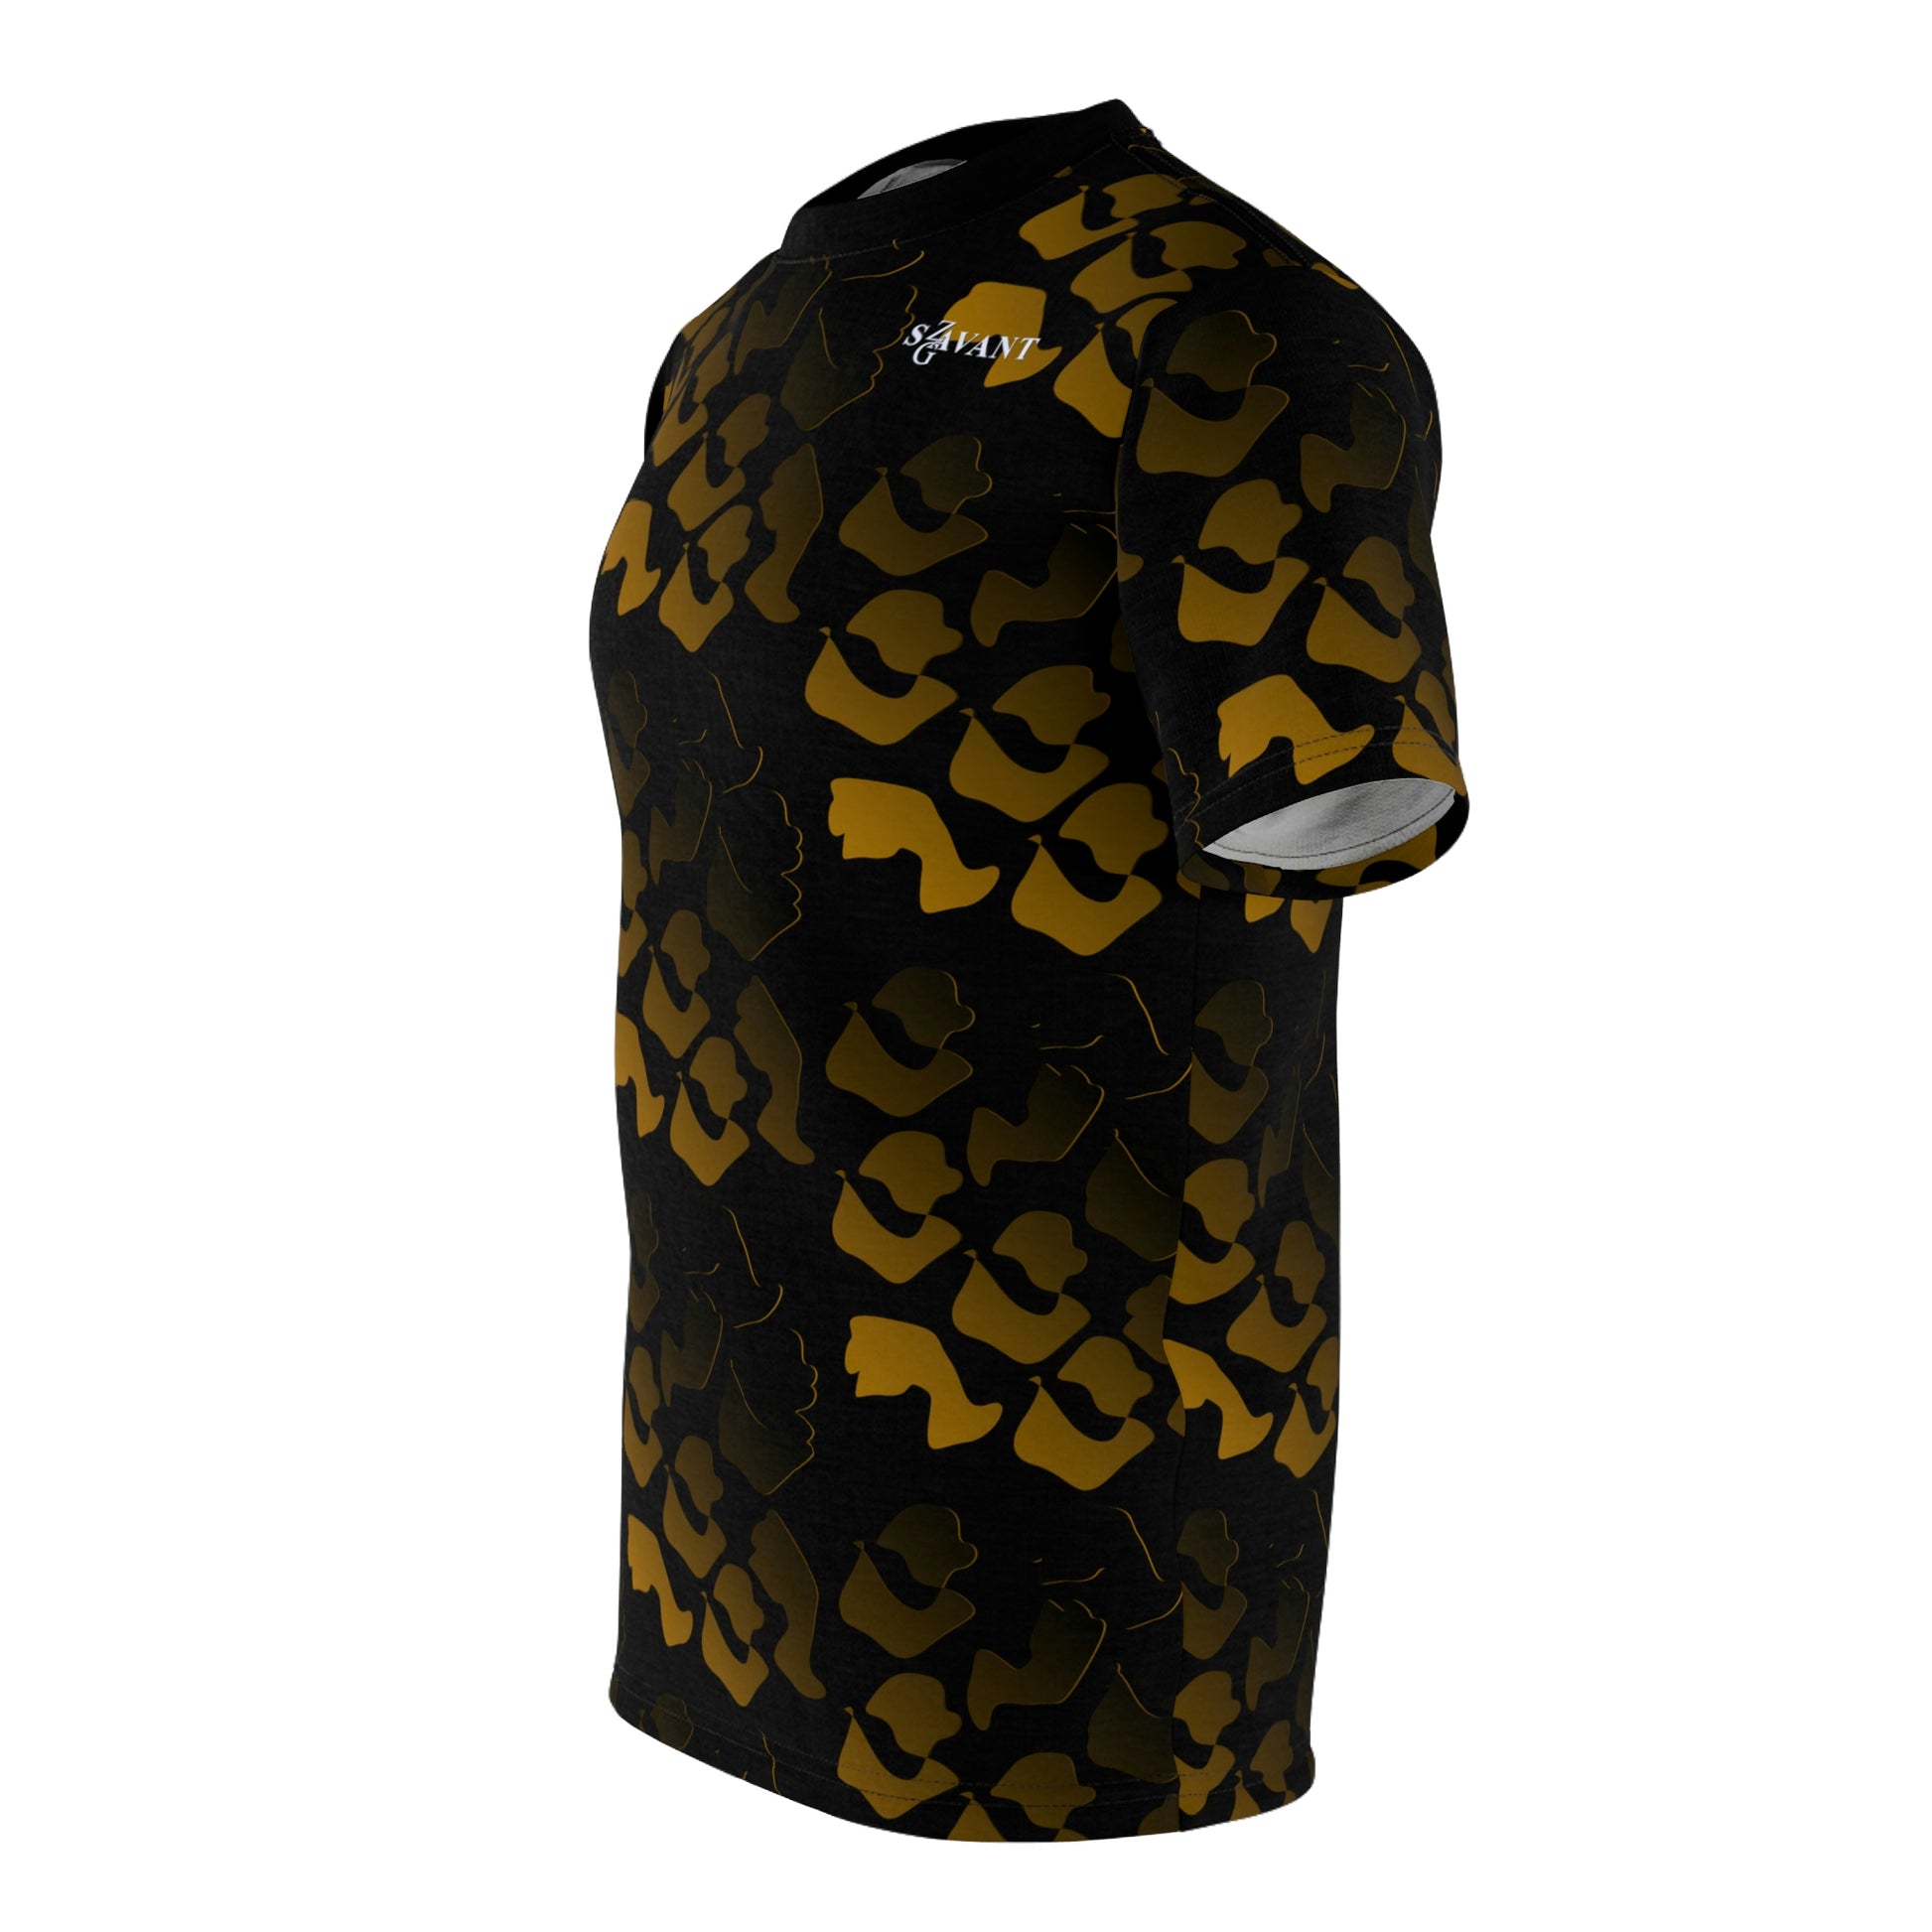 Black and Gold Camouflage T-shirt 